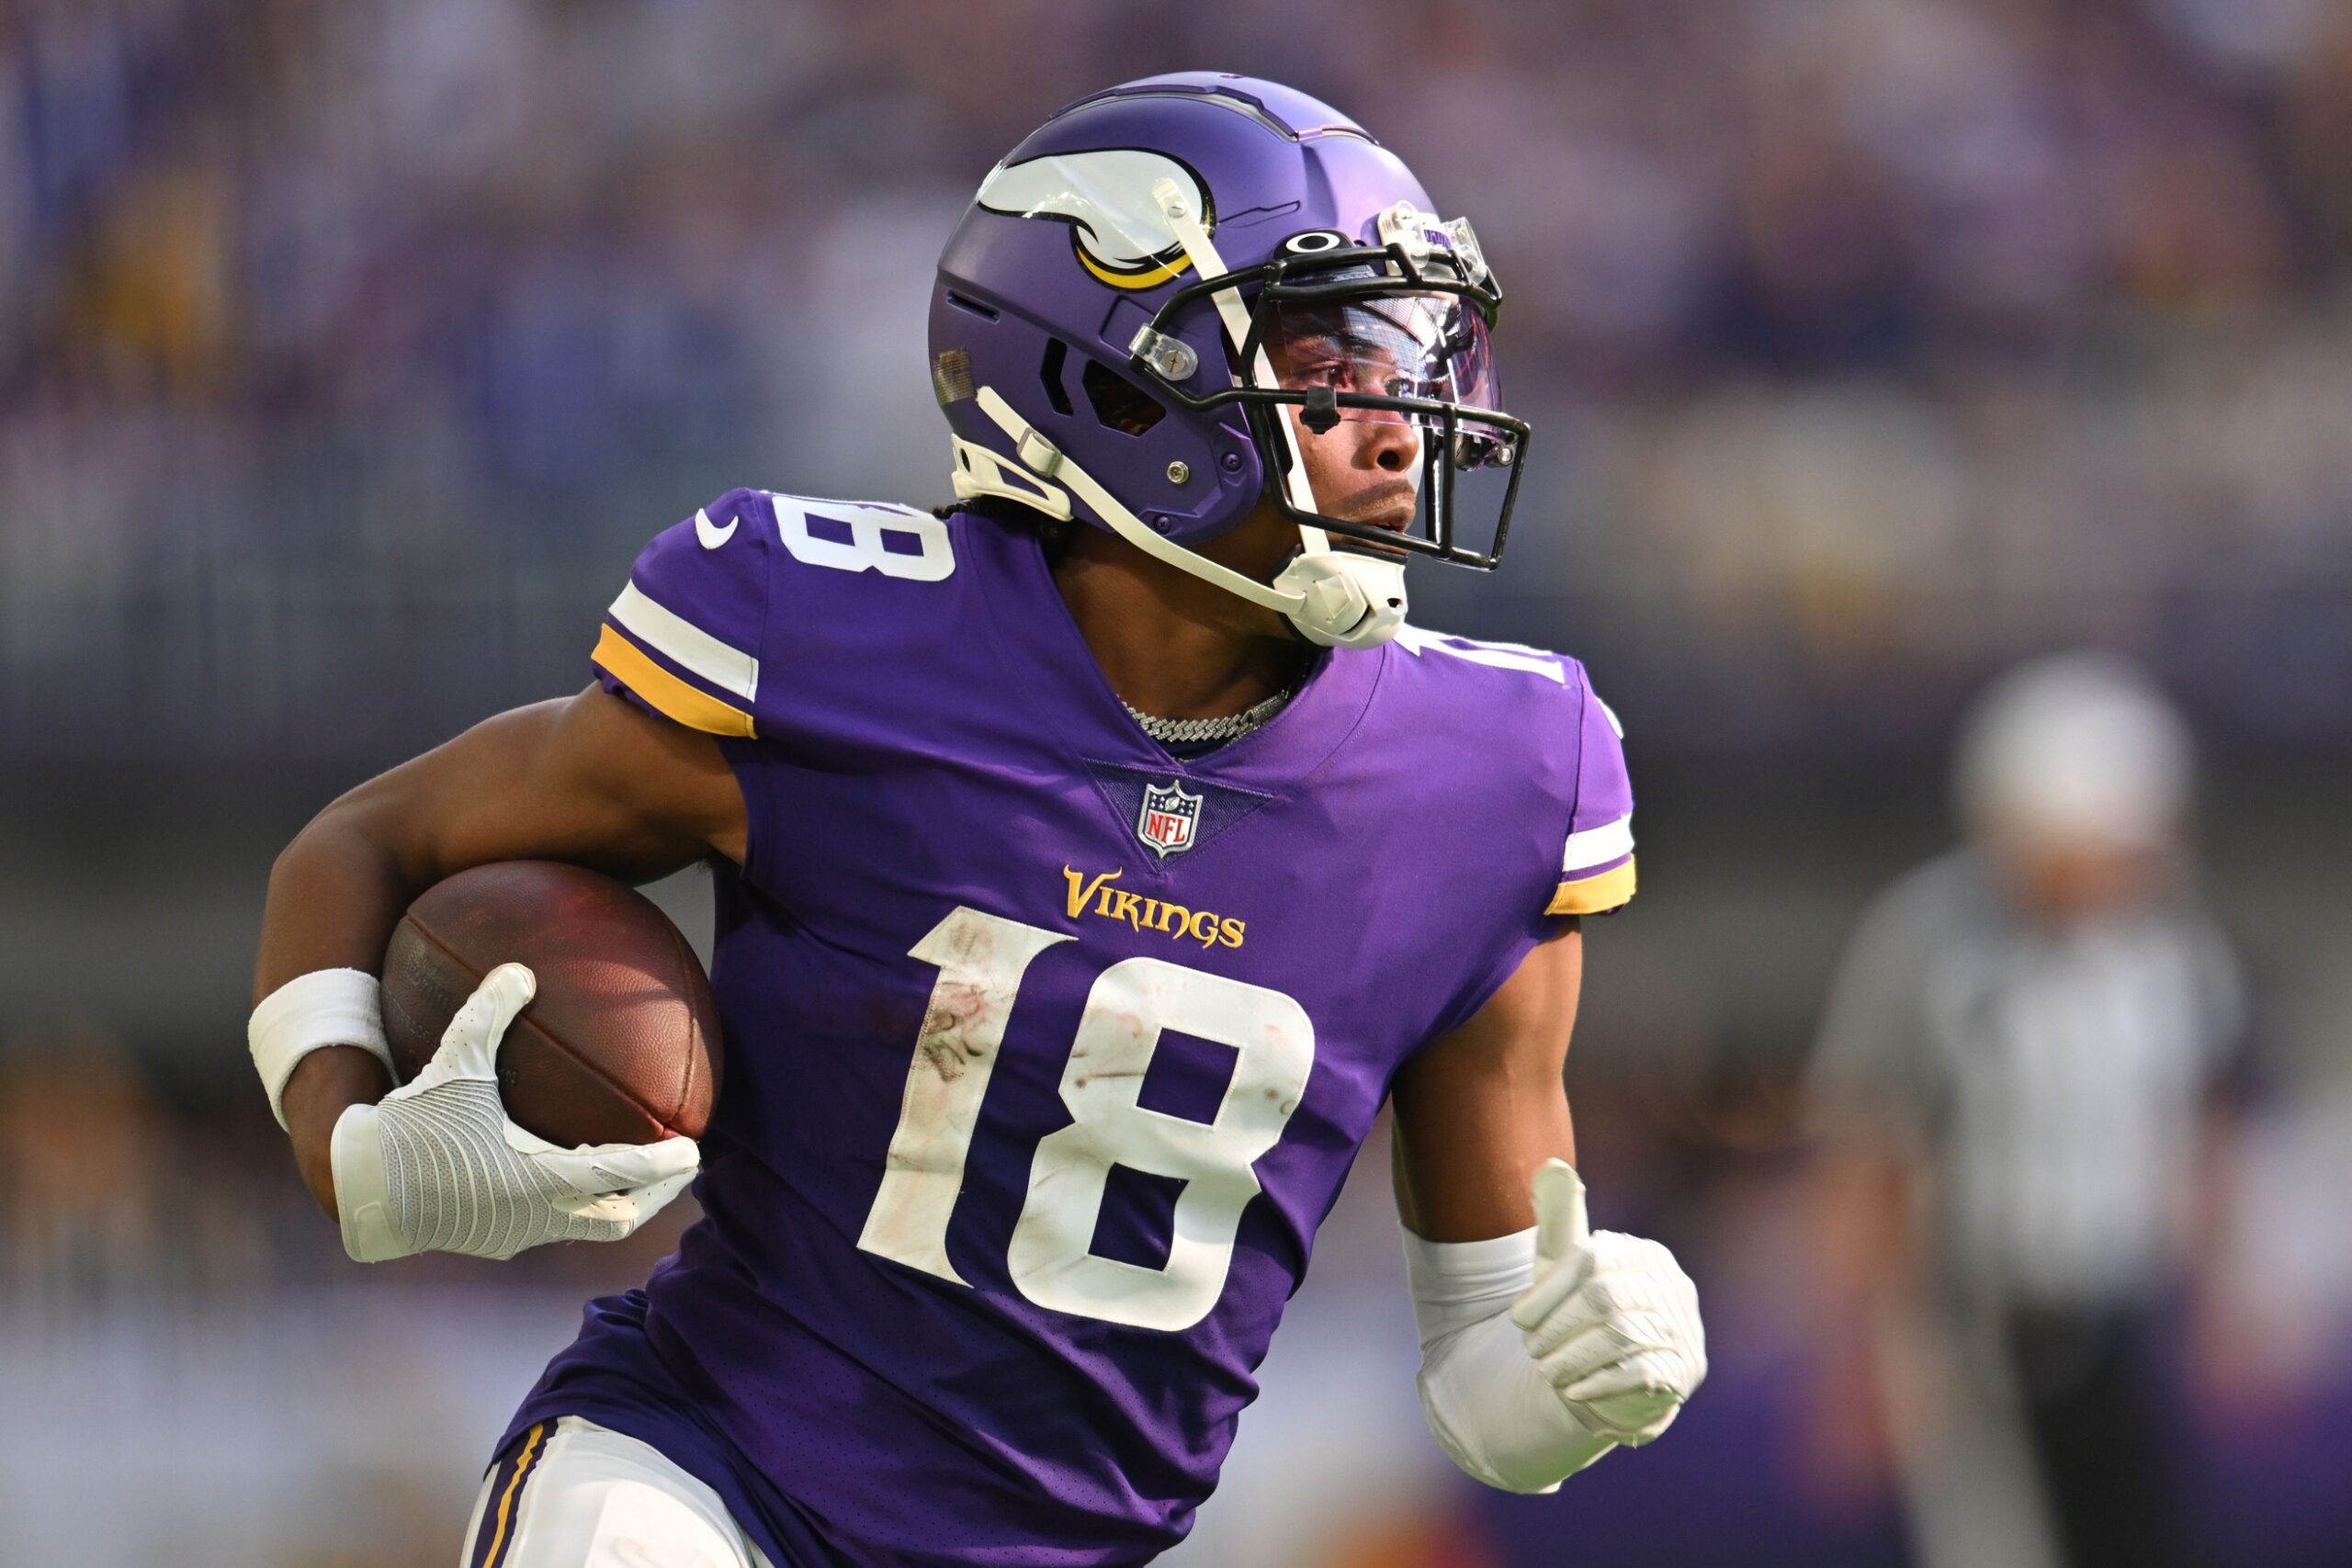 Fantasy Football cheat sheets - Updated 2022 player rankings, PPR, non-PPR,  depth charts, dynasty - ESPN